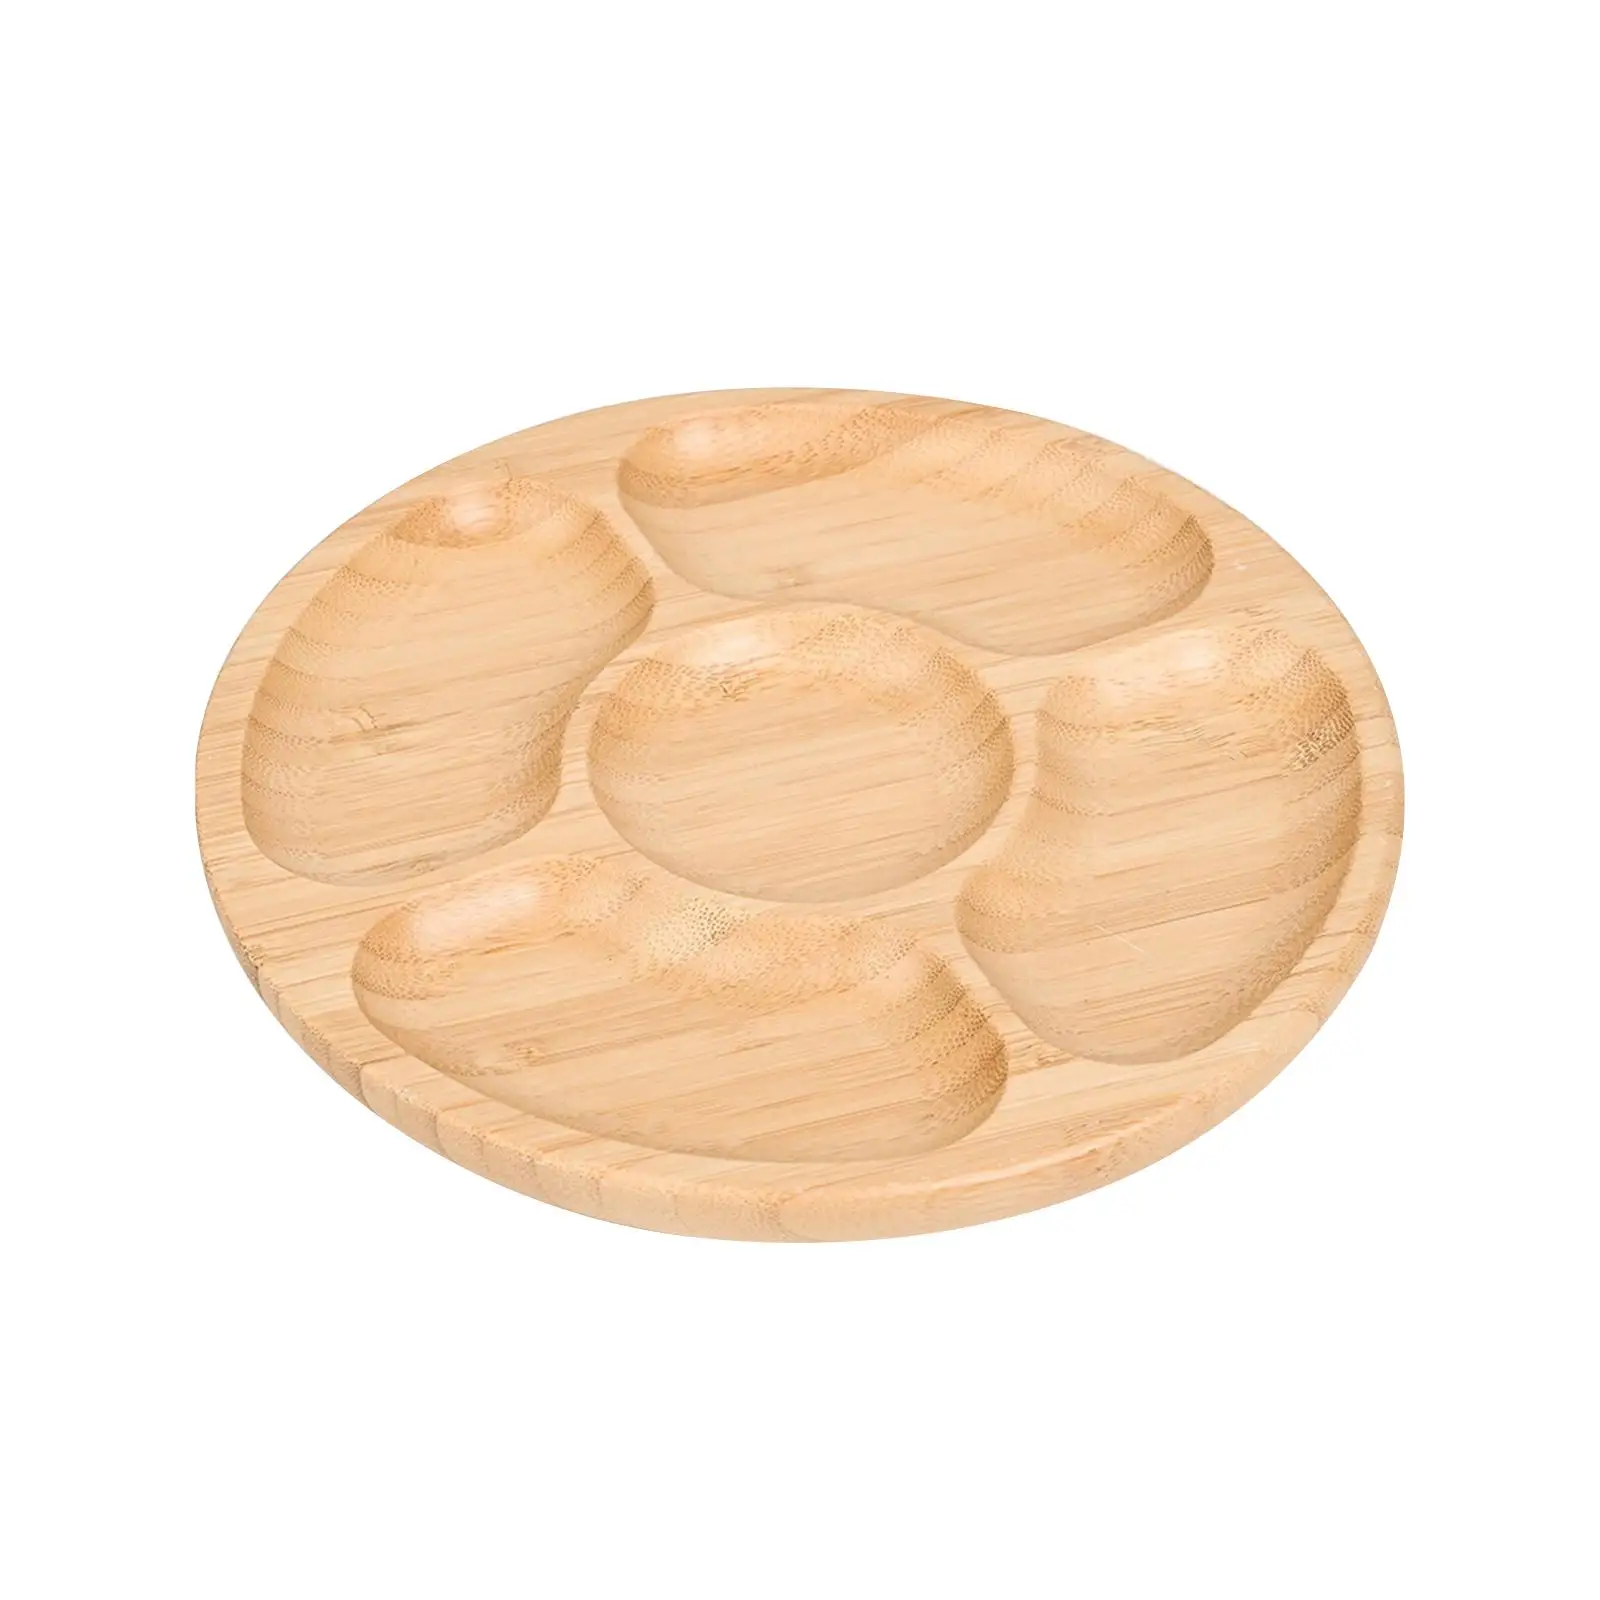 Wooden Tray Family Dinner Decor Fruit Plate for Cheese Wedding Appetizer